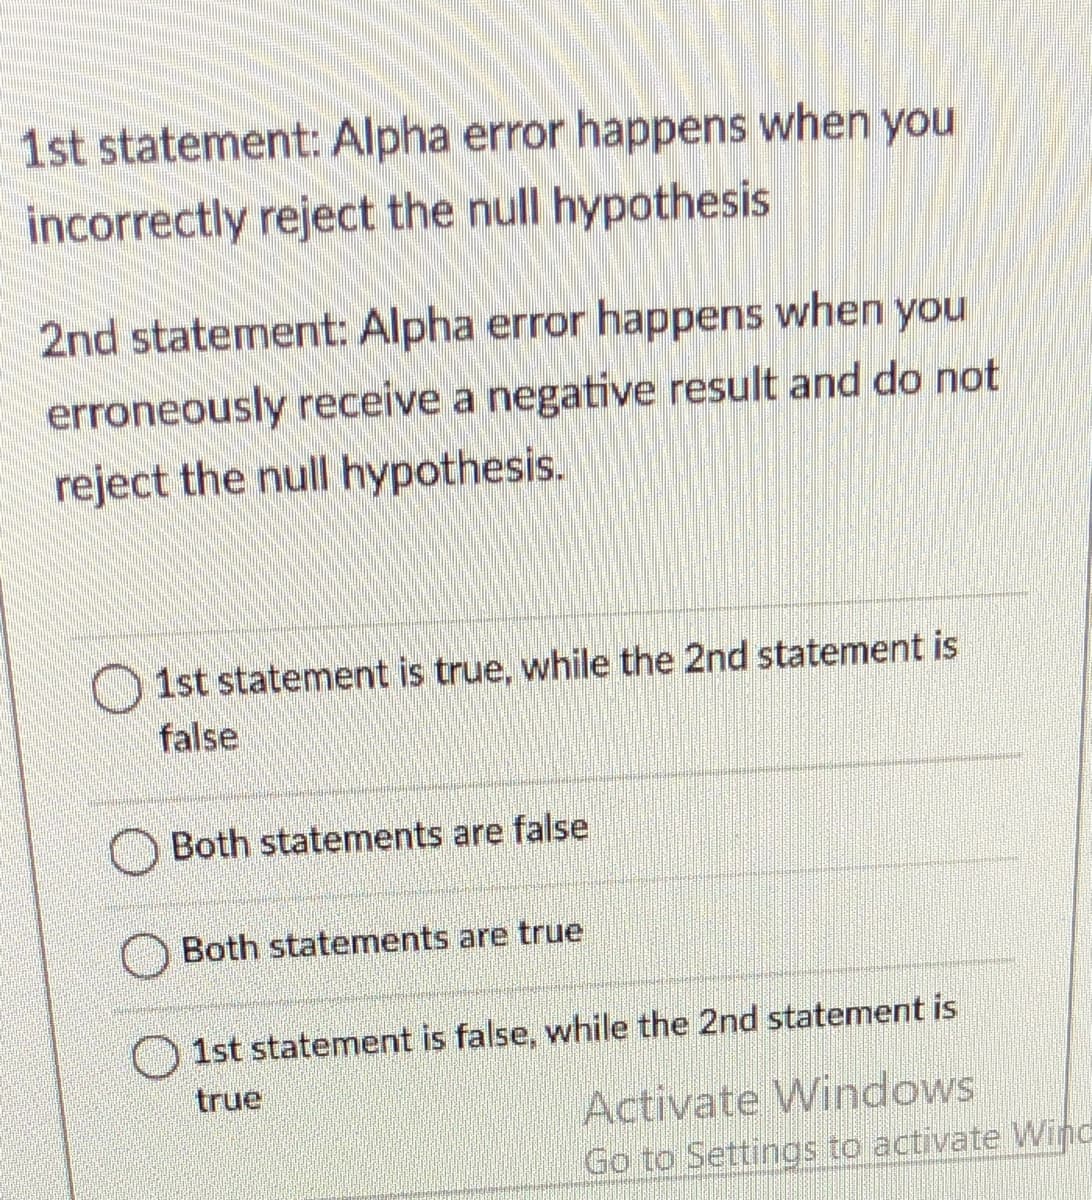 1st statement: Alpha error happens when you
incorrectly reject the null hypothesis
2nd statement: Alpha error happens when you
erroneously receive a negative result and do not
reject the null hypothesis.
O 1st statement is true, while the 2nd statement is
false
Both statements are false
Both statements are true
O 1st statement is false, while the 2nd statement is
true
Activate Windows
Go to Settings to activate Wind
